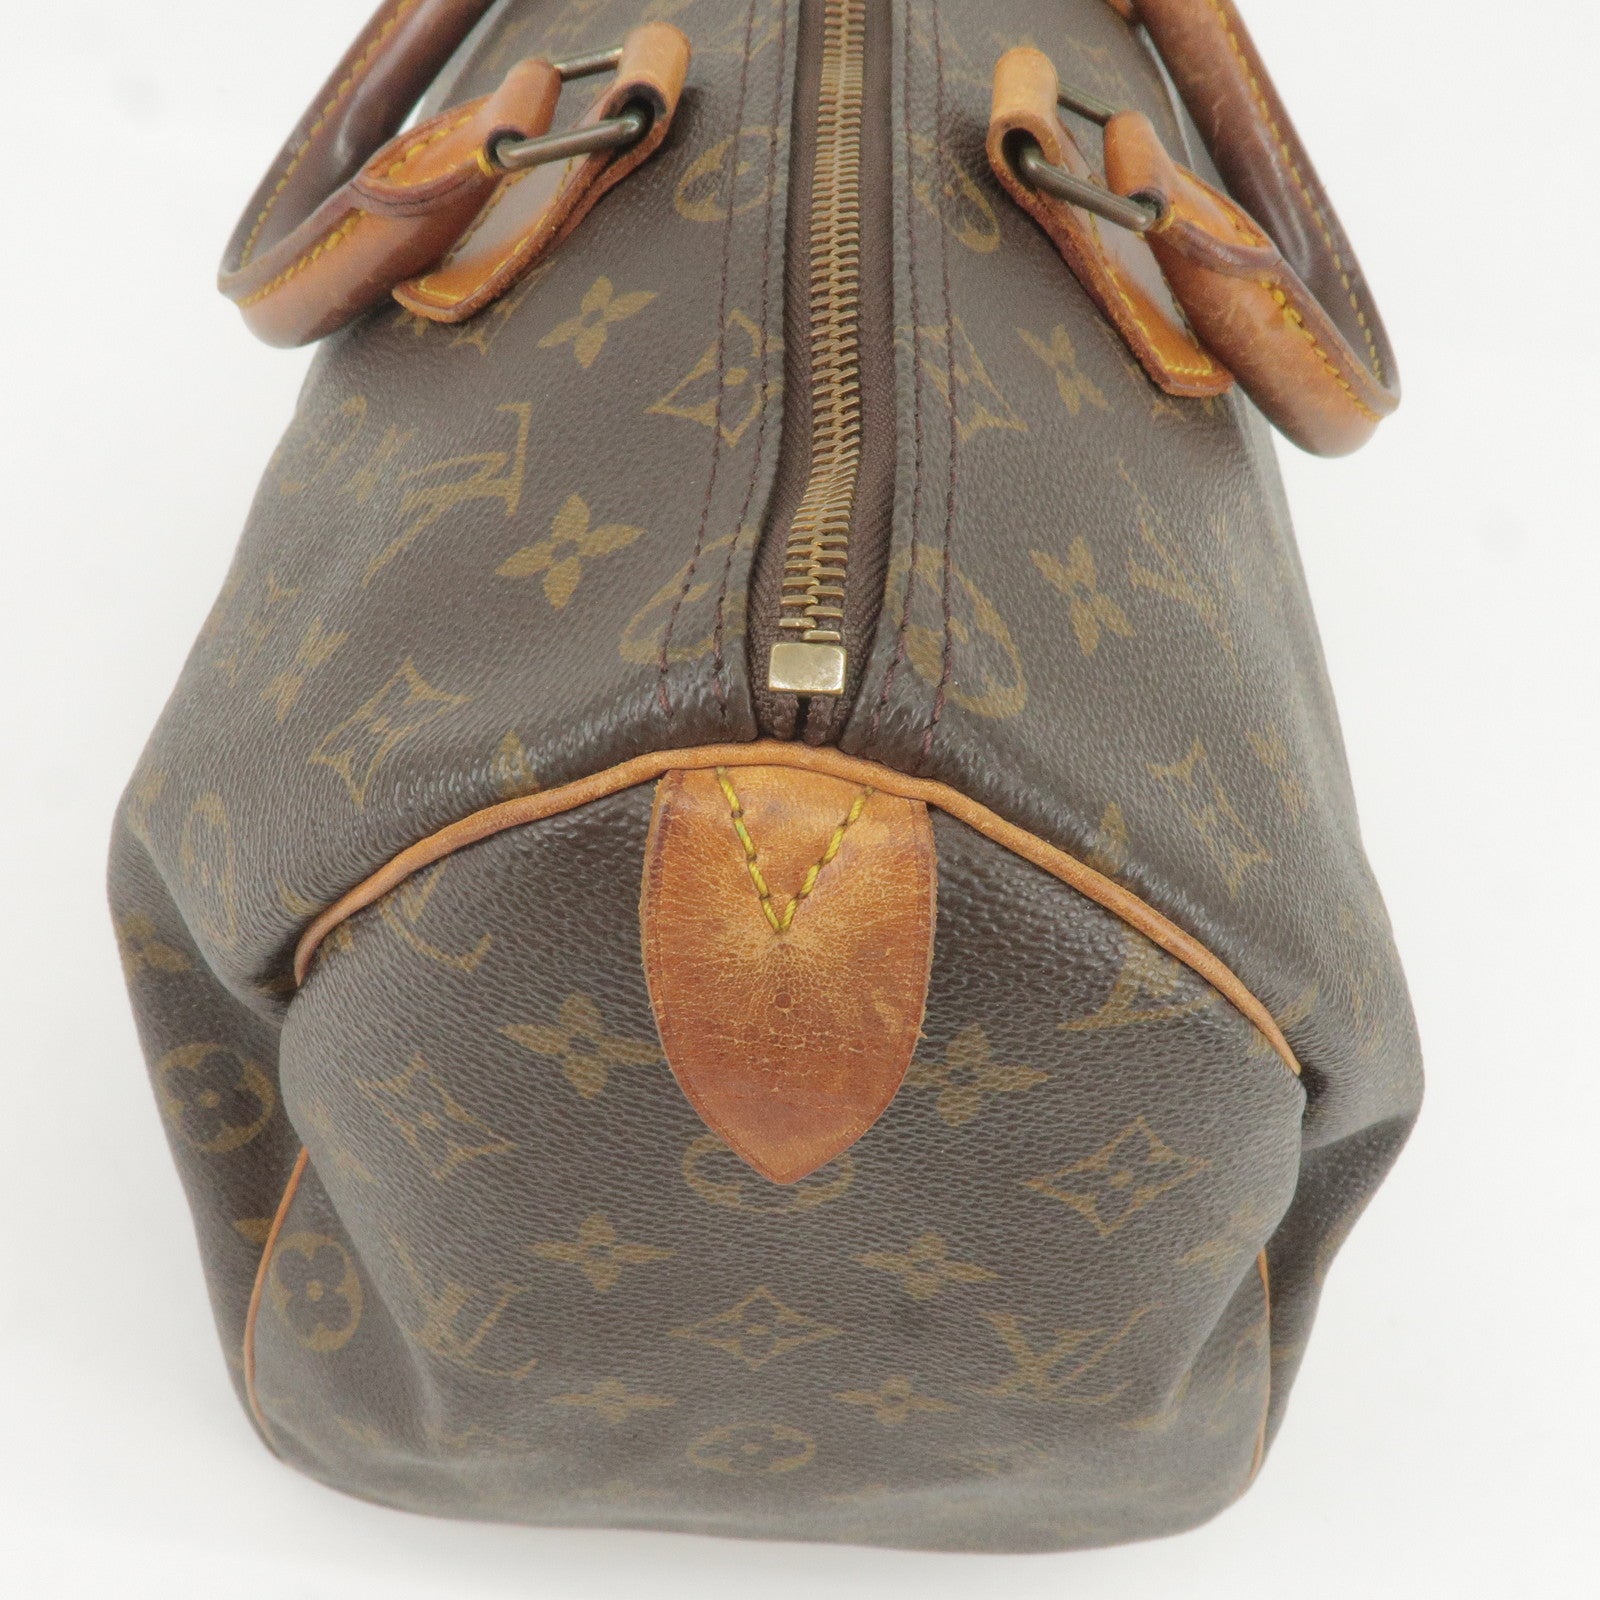 Louis+Vuitton+Cannes+Vanity+Red+Leather+Monogram+Epi for sale online